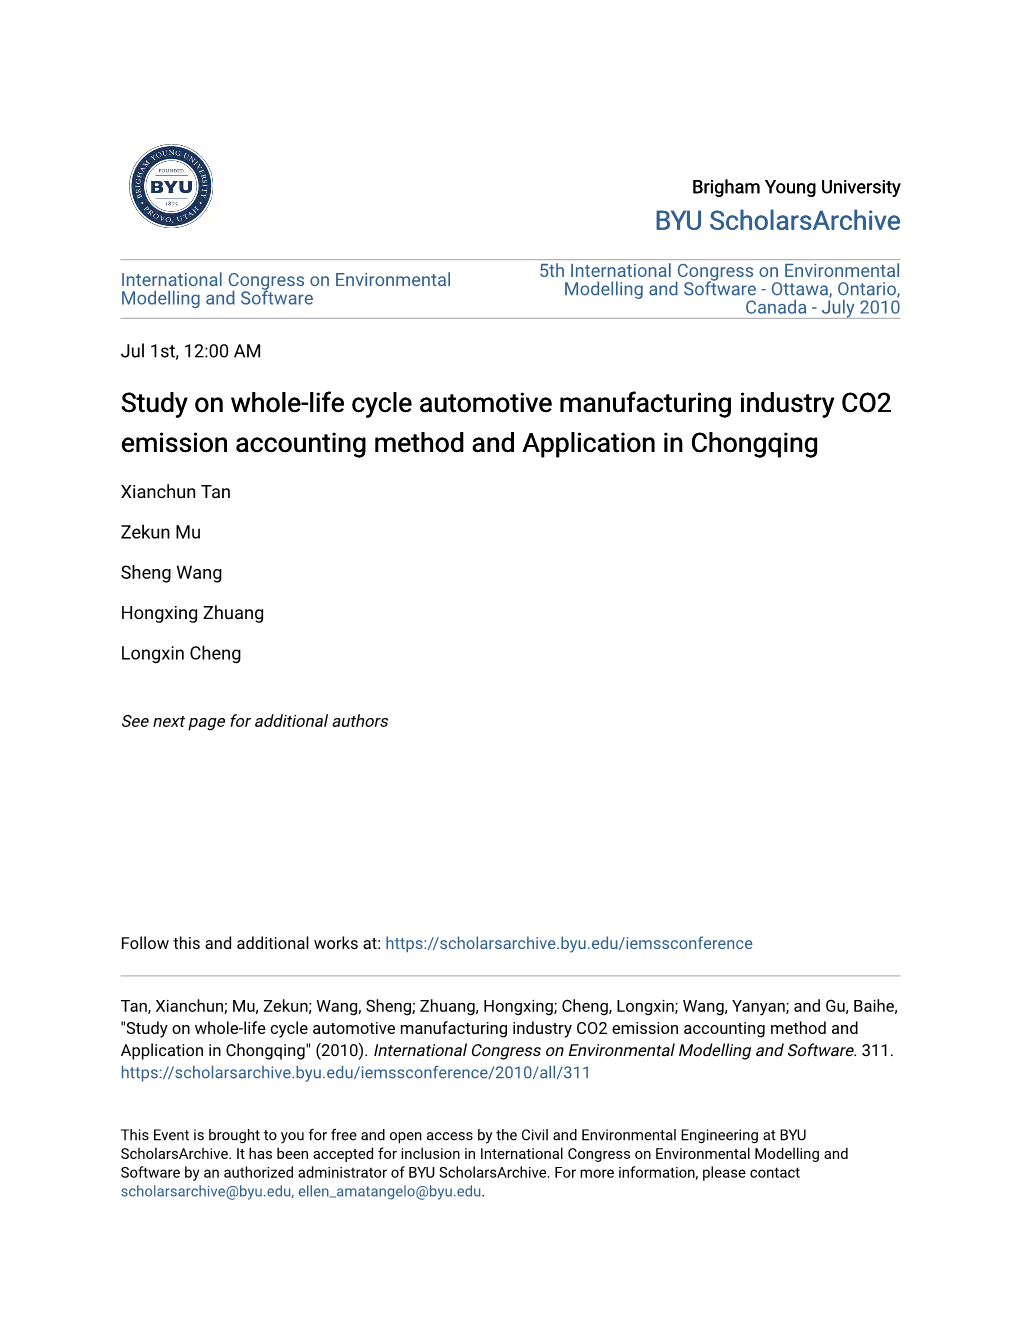 Study on Whole-Life Cycle Automotive Manufacturing Industry CO2 Emission Accounting Method and Application in Chongqing